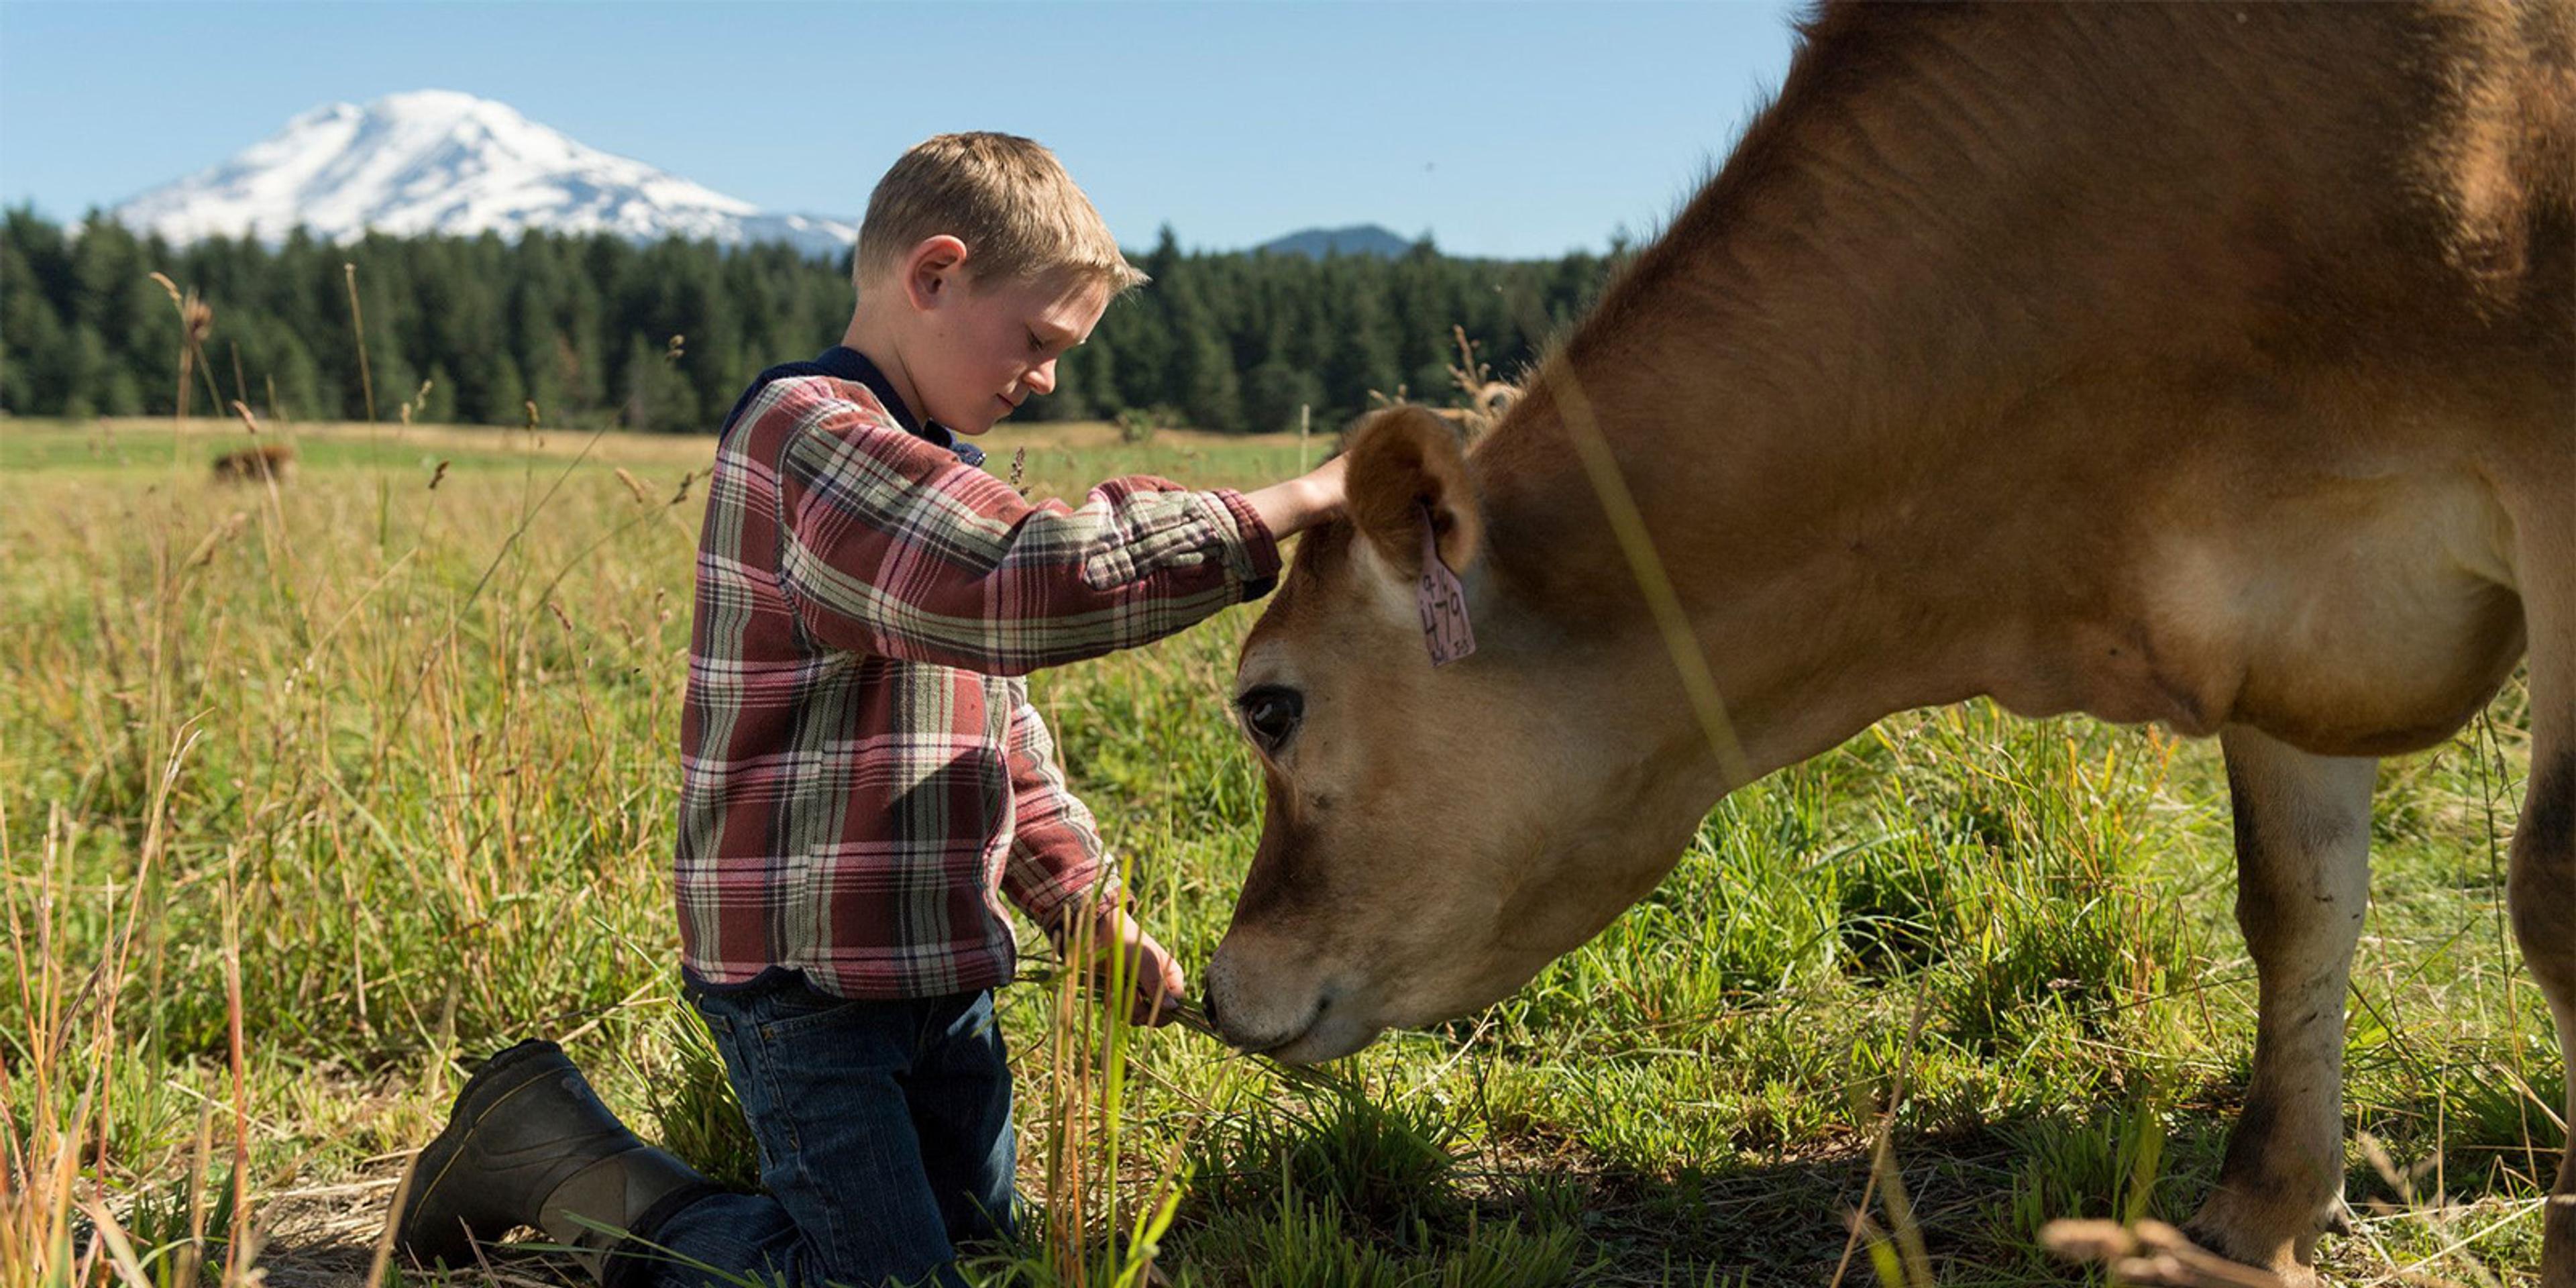 A boy pets a cow in a mountainous landscape at the Pearson organic dairy farm in Washington.